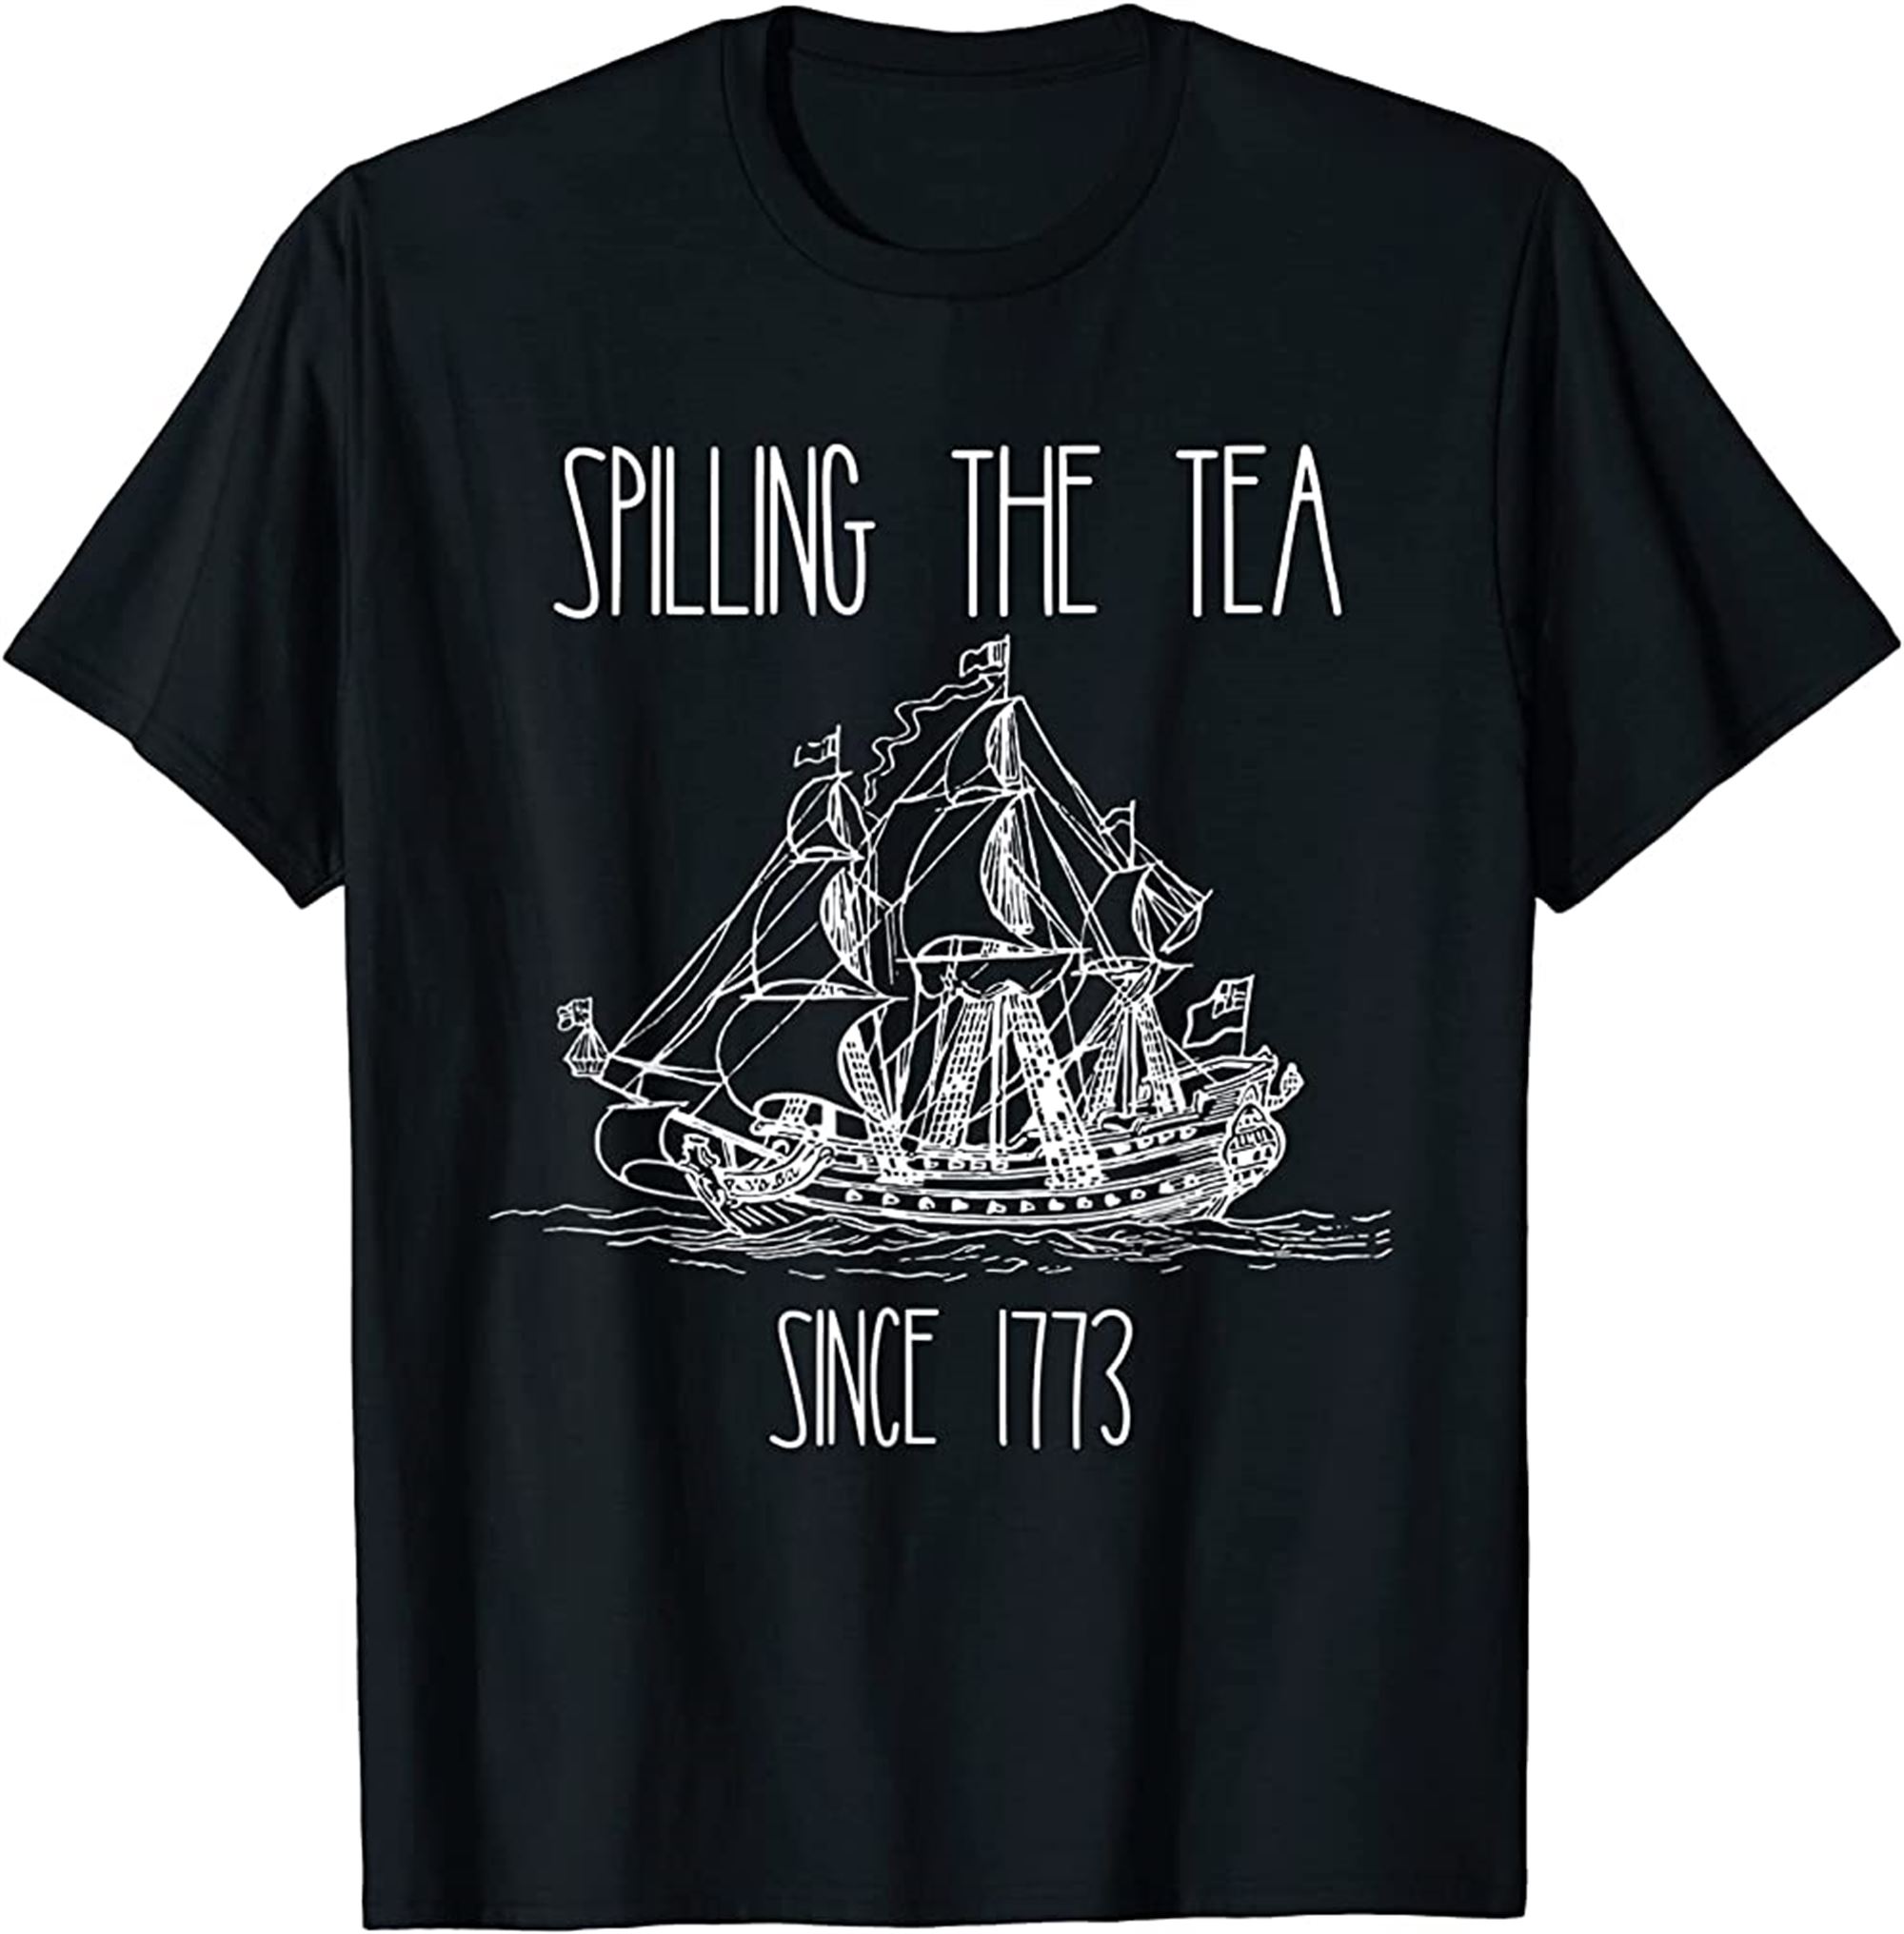 Spilling The Tea Since 1773 Funny Patriotic 4th Of July Gift T-shirt Plus Size Up To 5xl